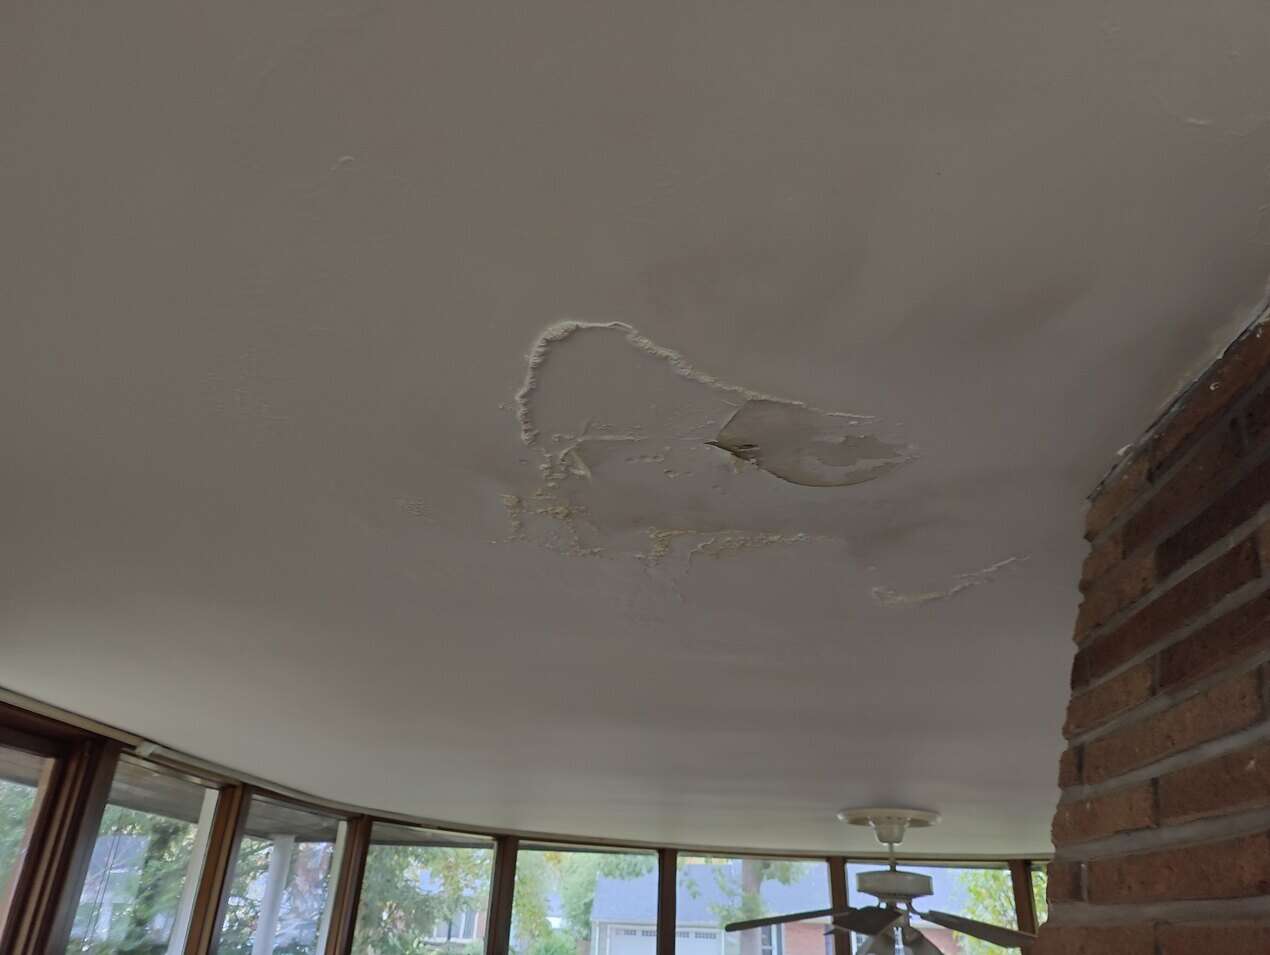 Water damaged plaster ceiling - Snyder NY 14226